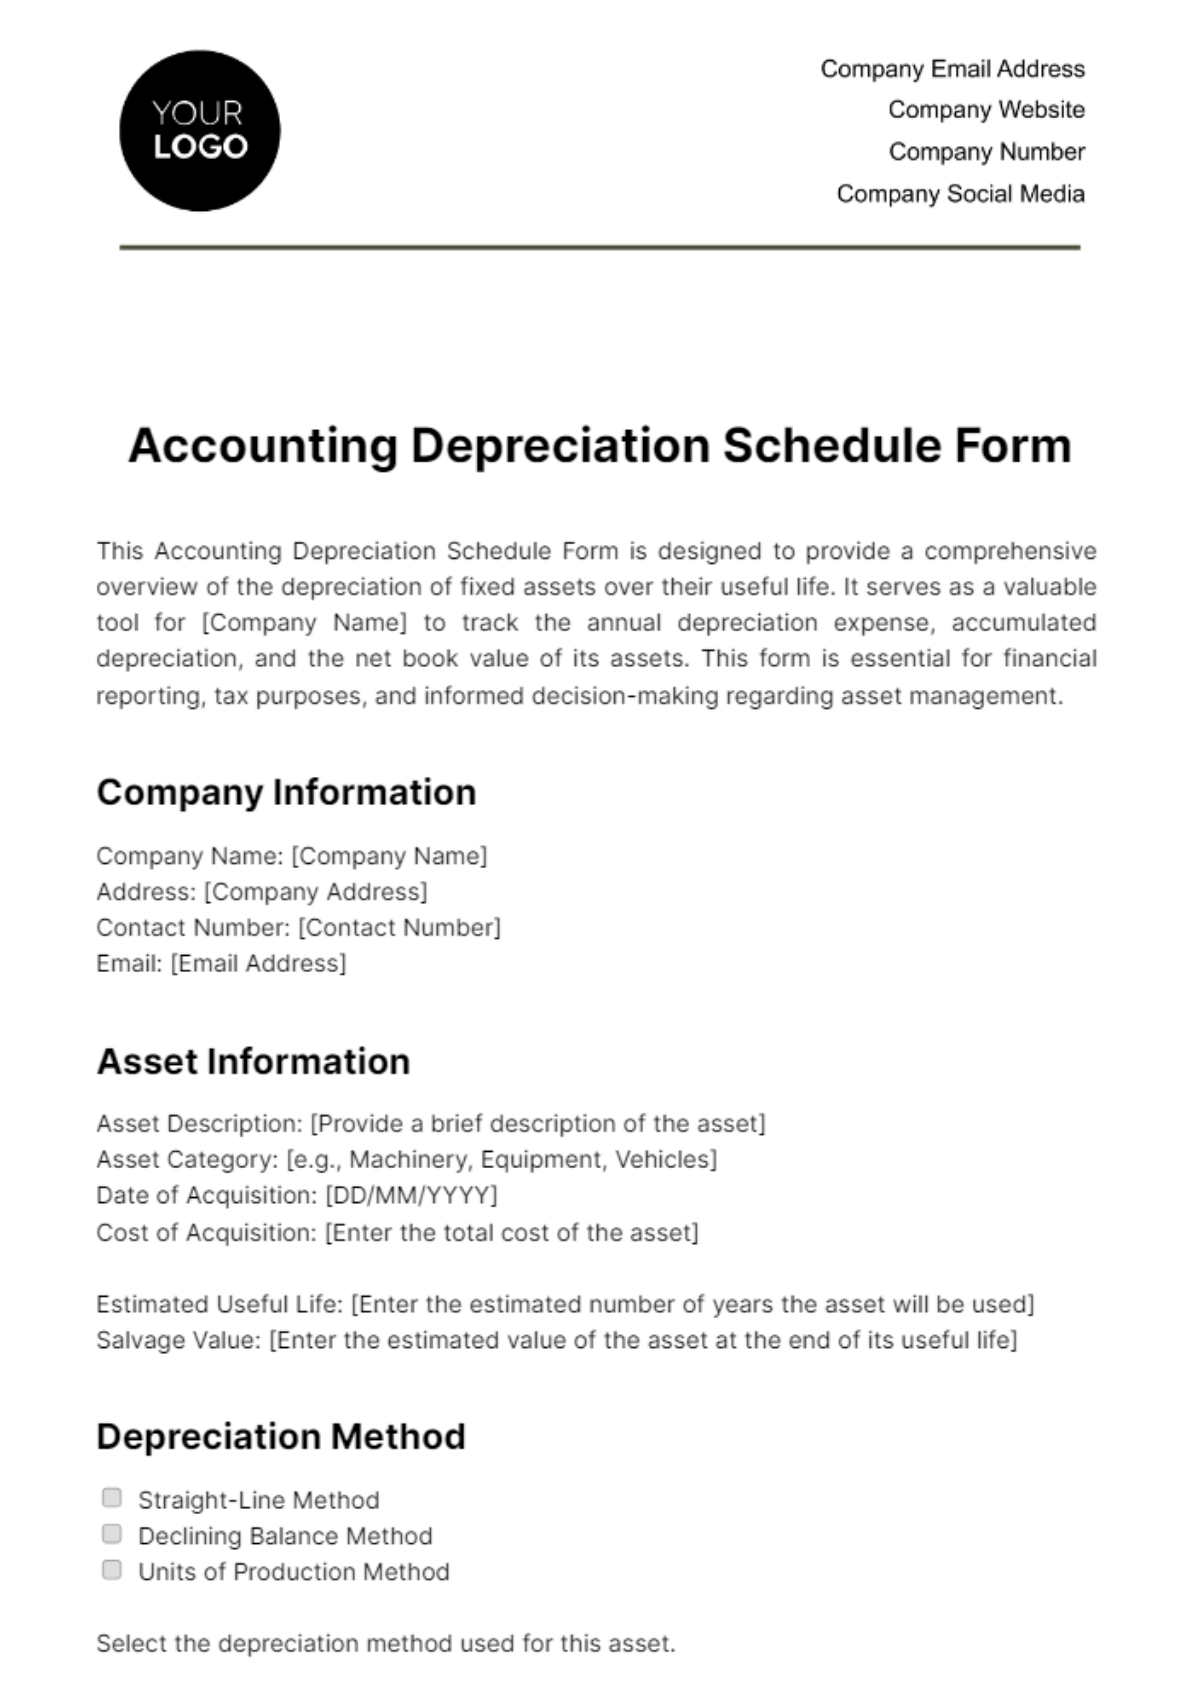 Accounting Depreciation Schedule Form Template